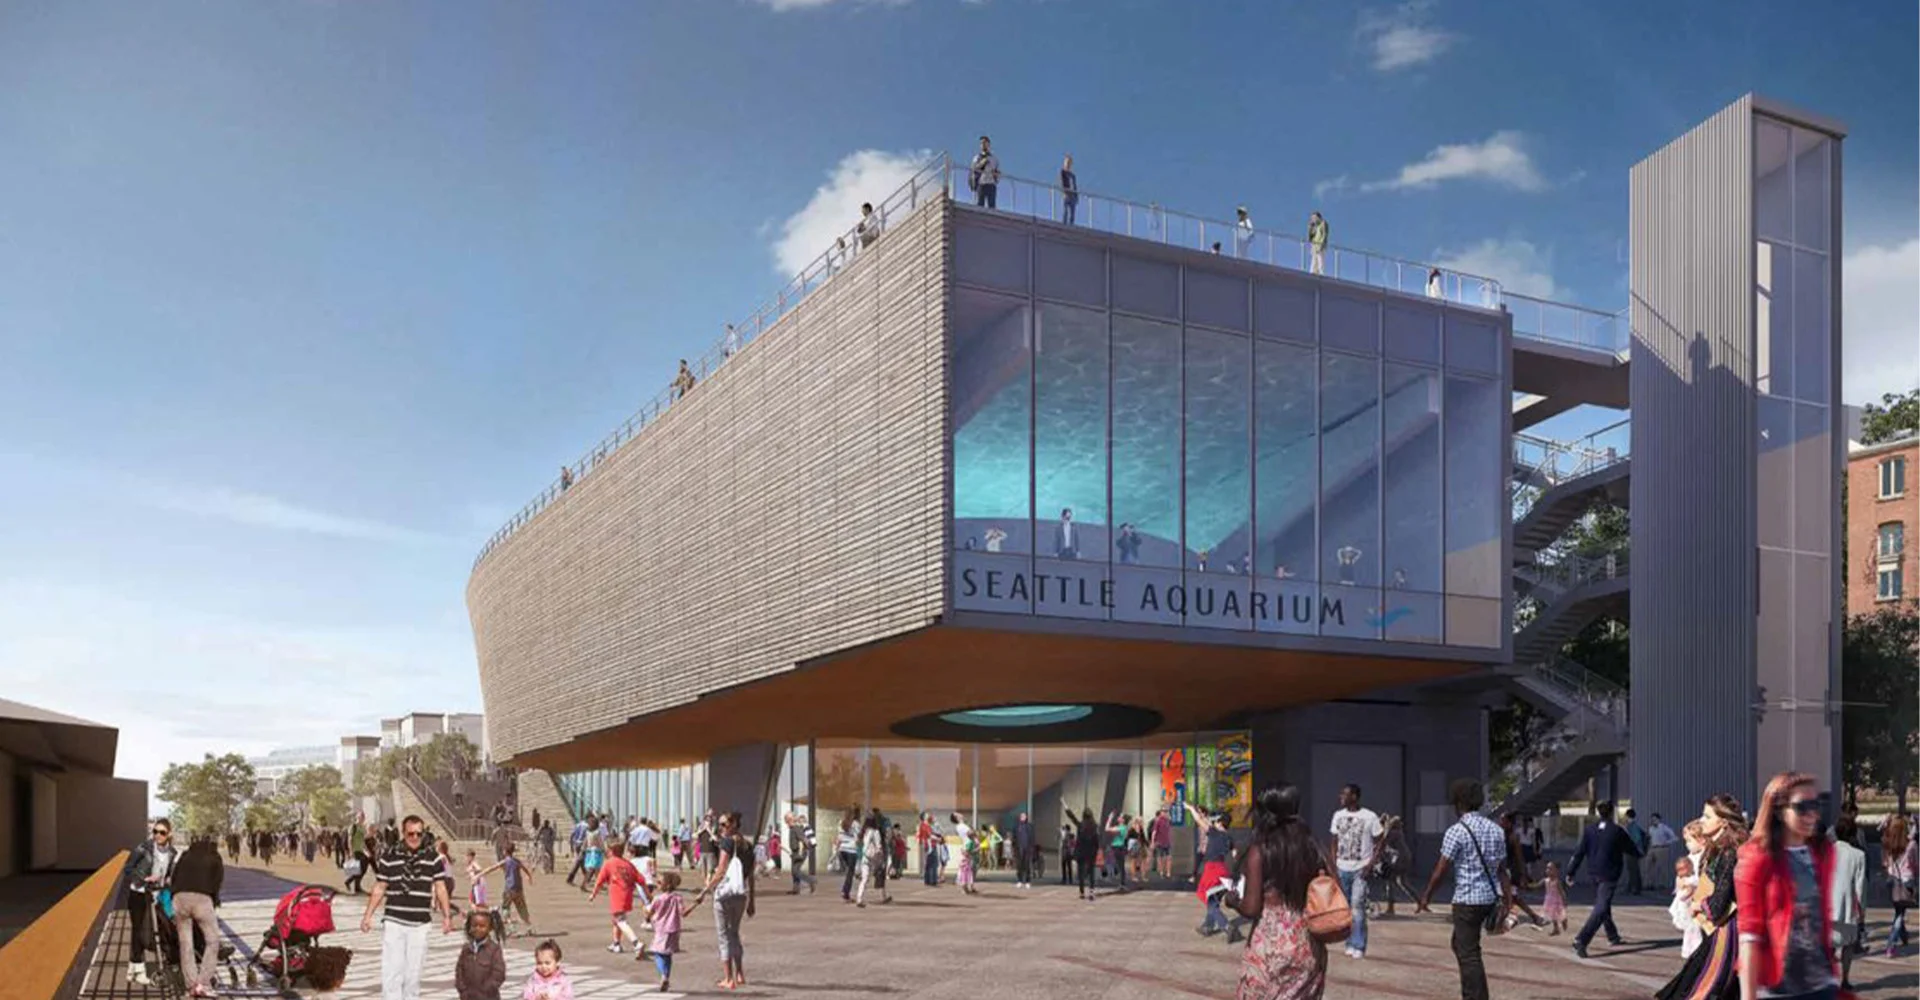 Exterior rendering of the Seattle Aquarium's new Ocean Pavilion building, with crowds of people walking in front and to the side of the building, as viewed from the walkway outside the front of the building.